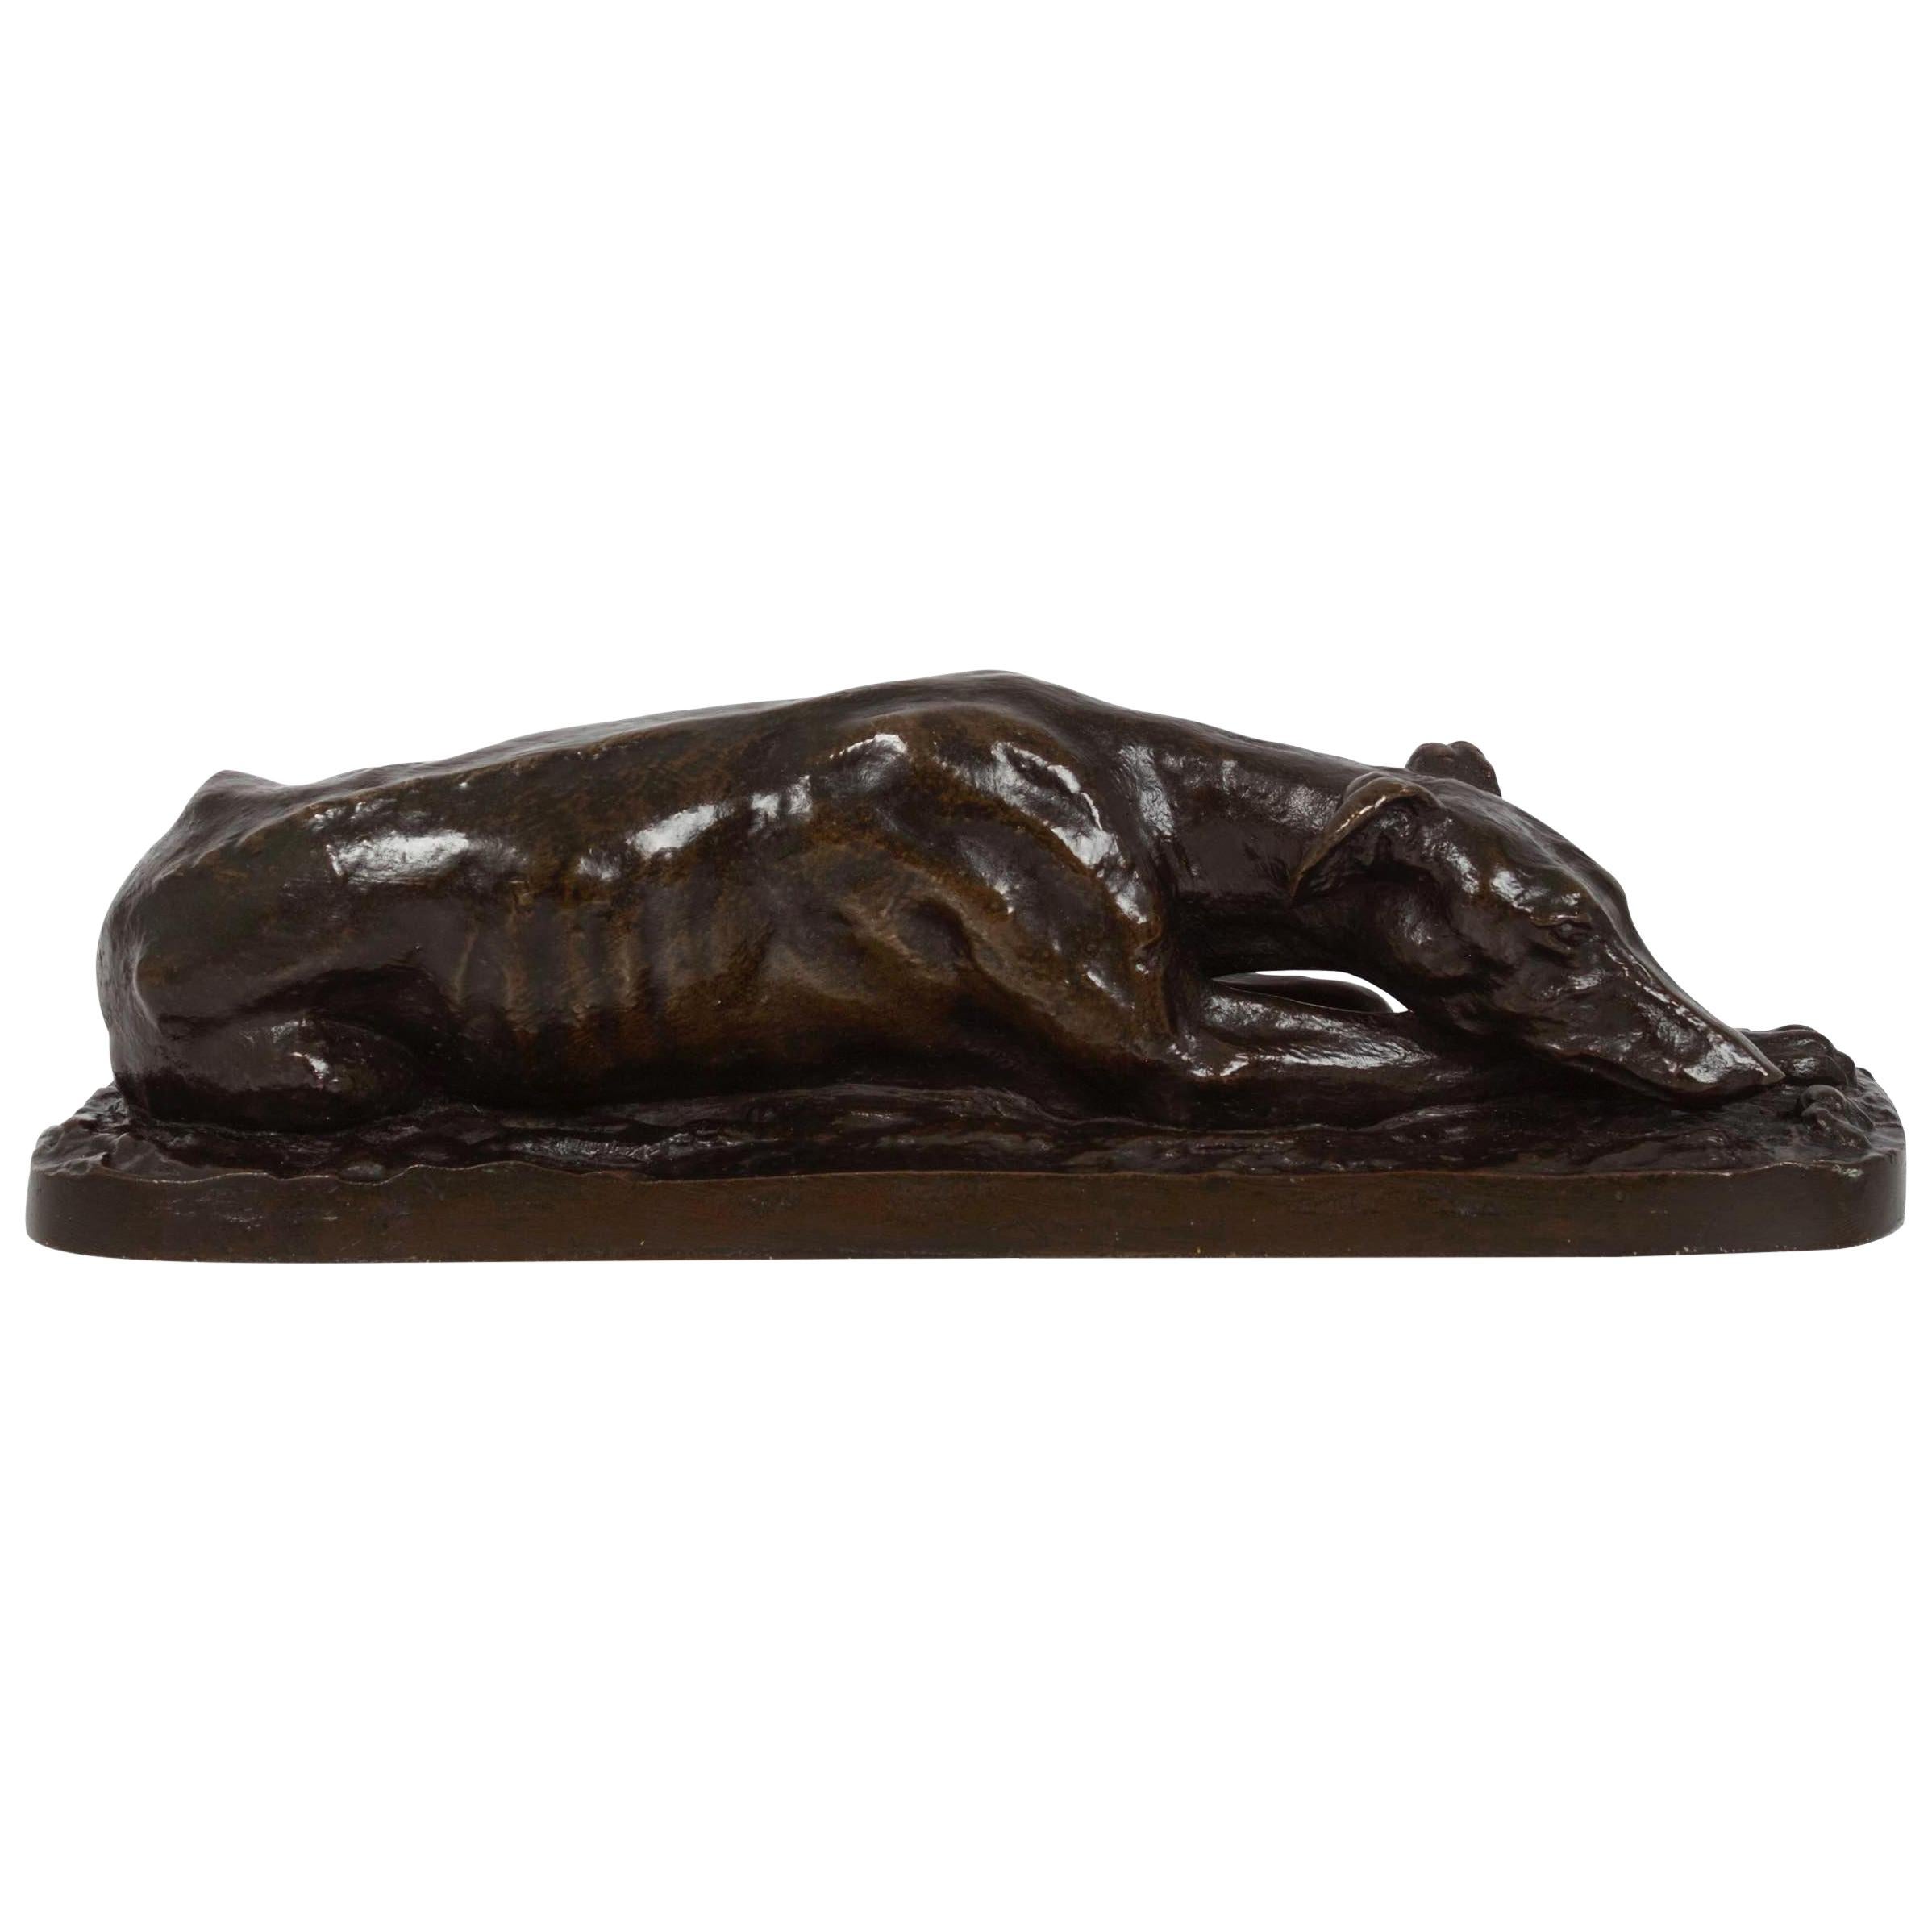 French Bronze Sculpture "Reclining Greyhound" by Christophe Fratin, circa 1860